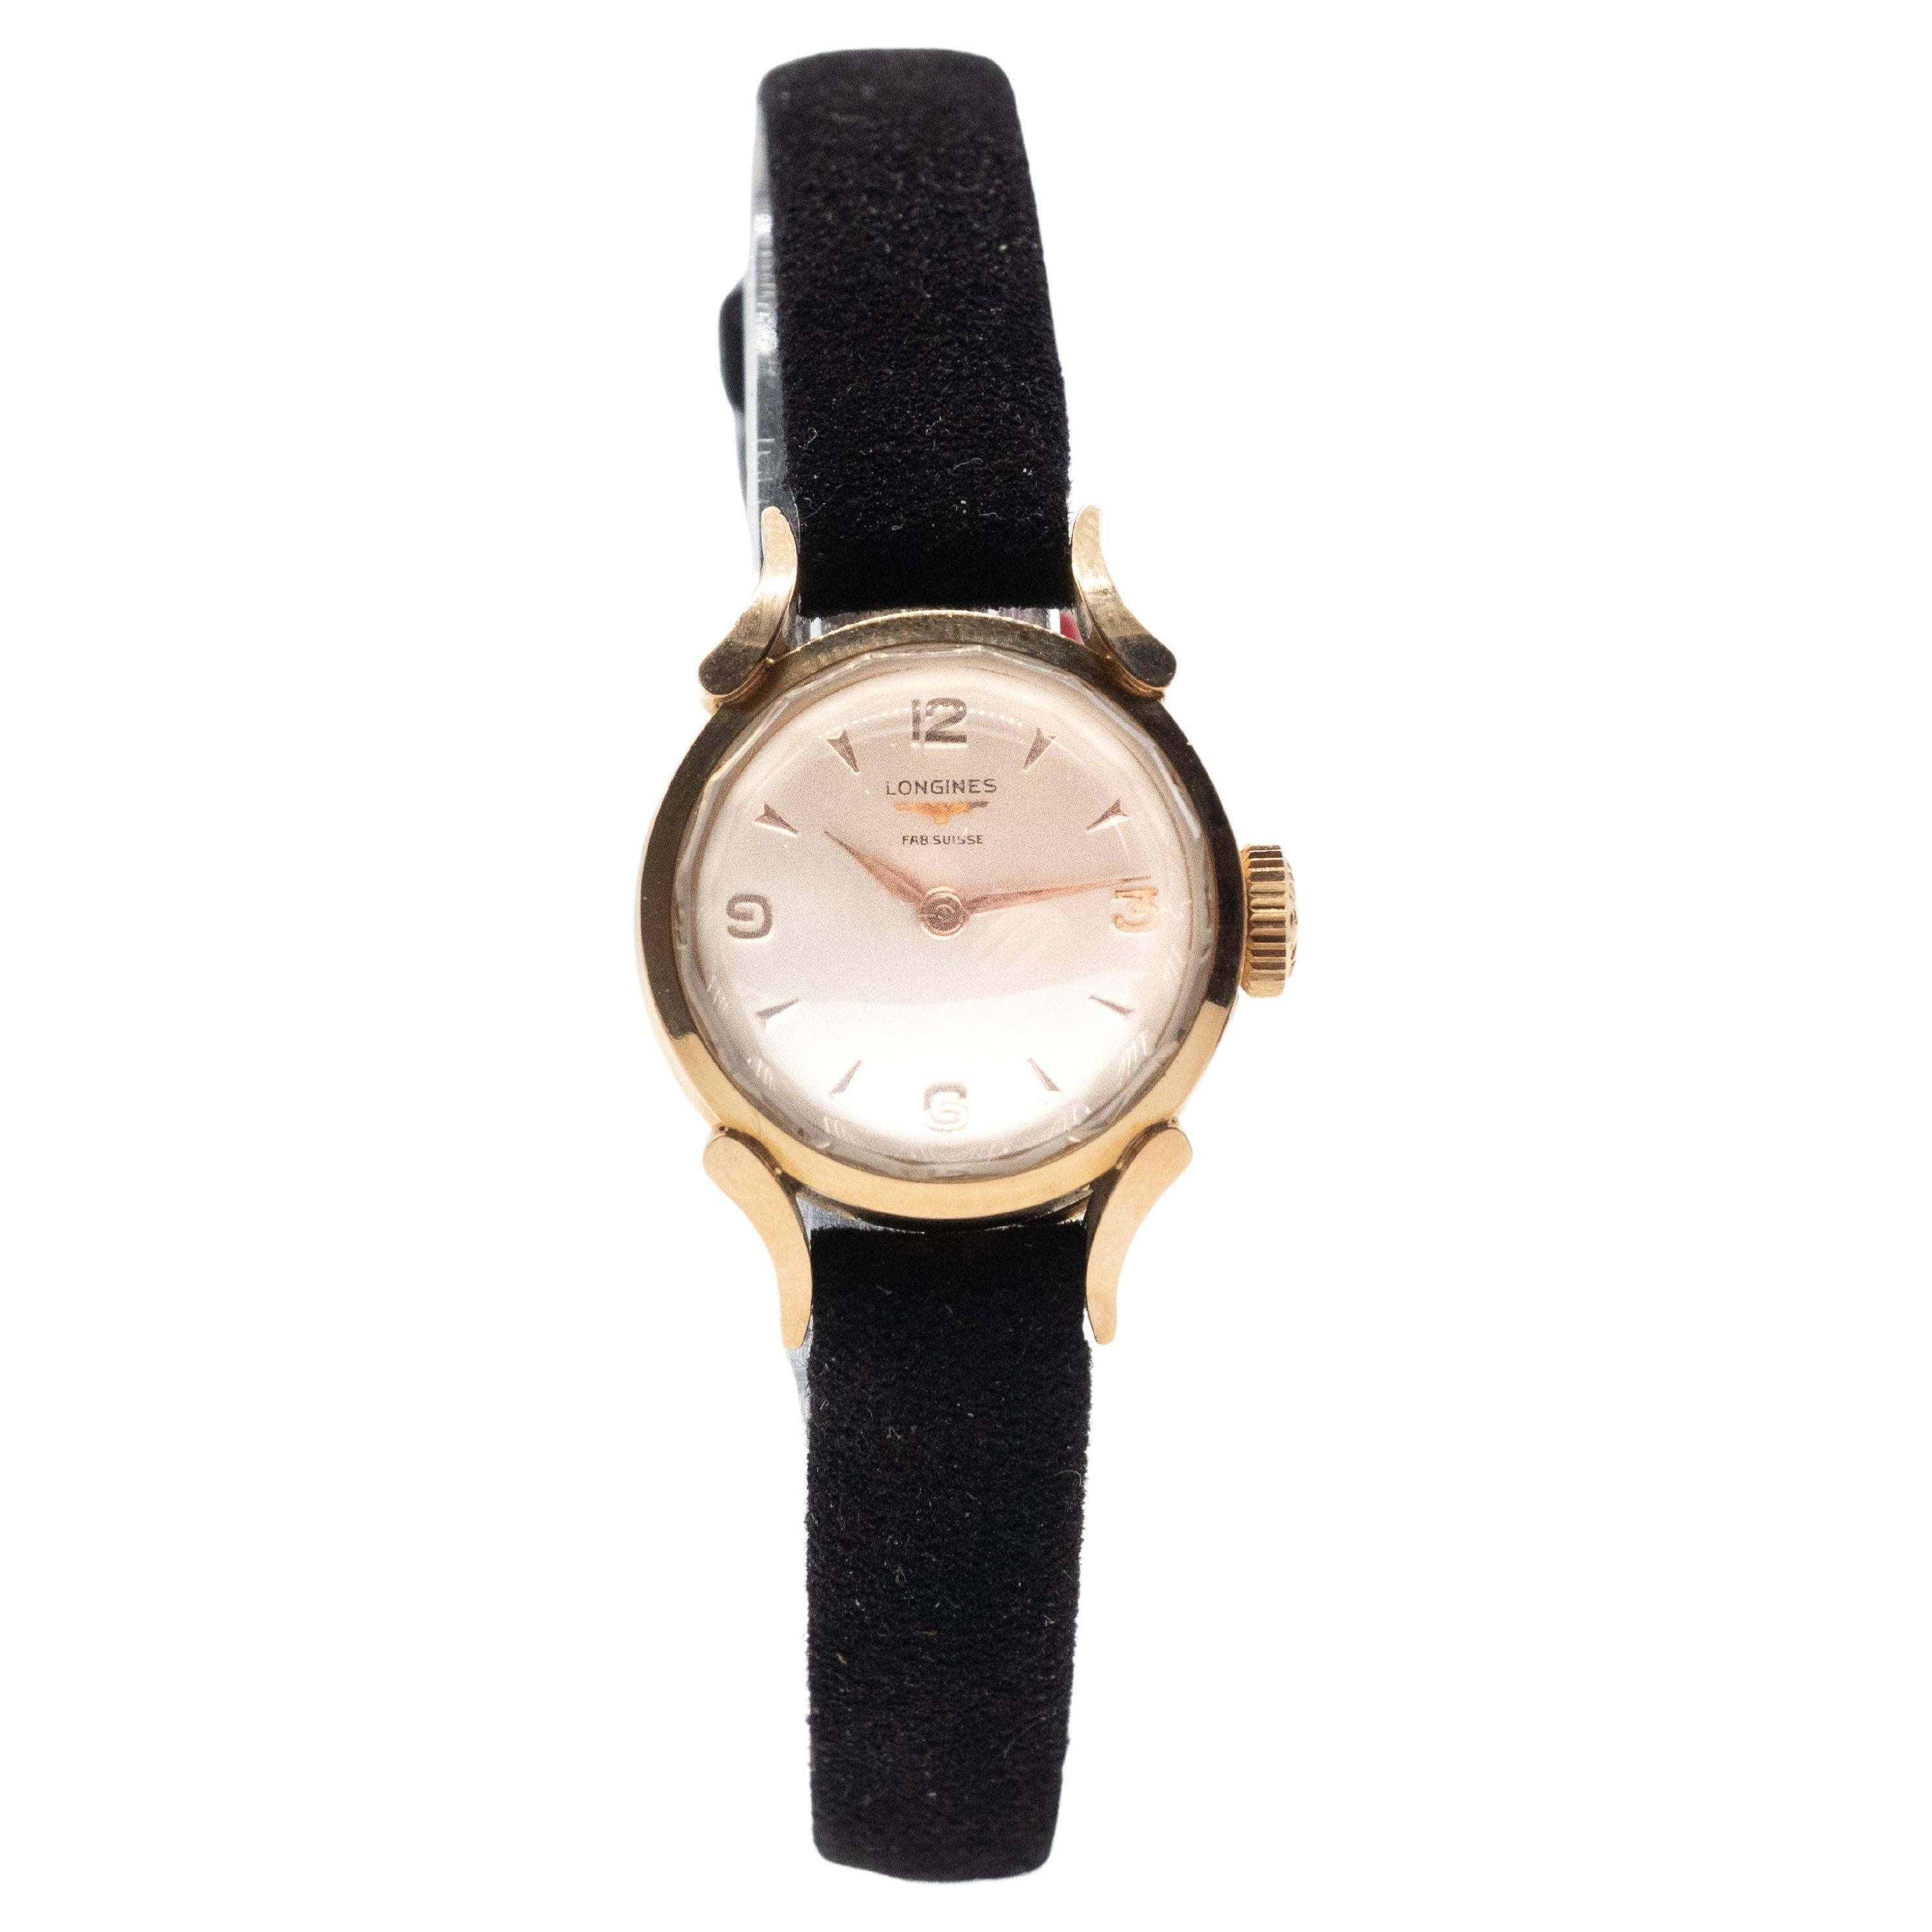 Longines Watch 18-Carat Gold For Sale